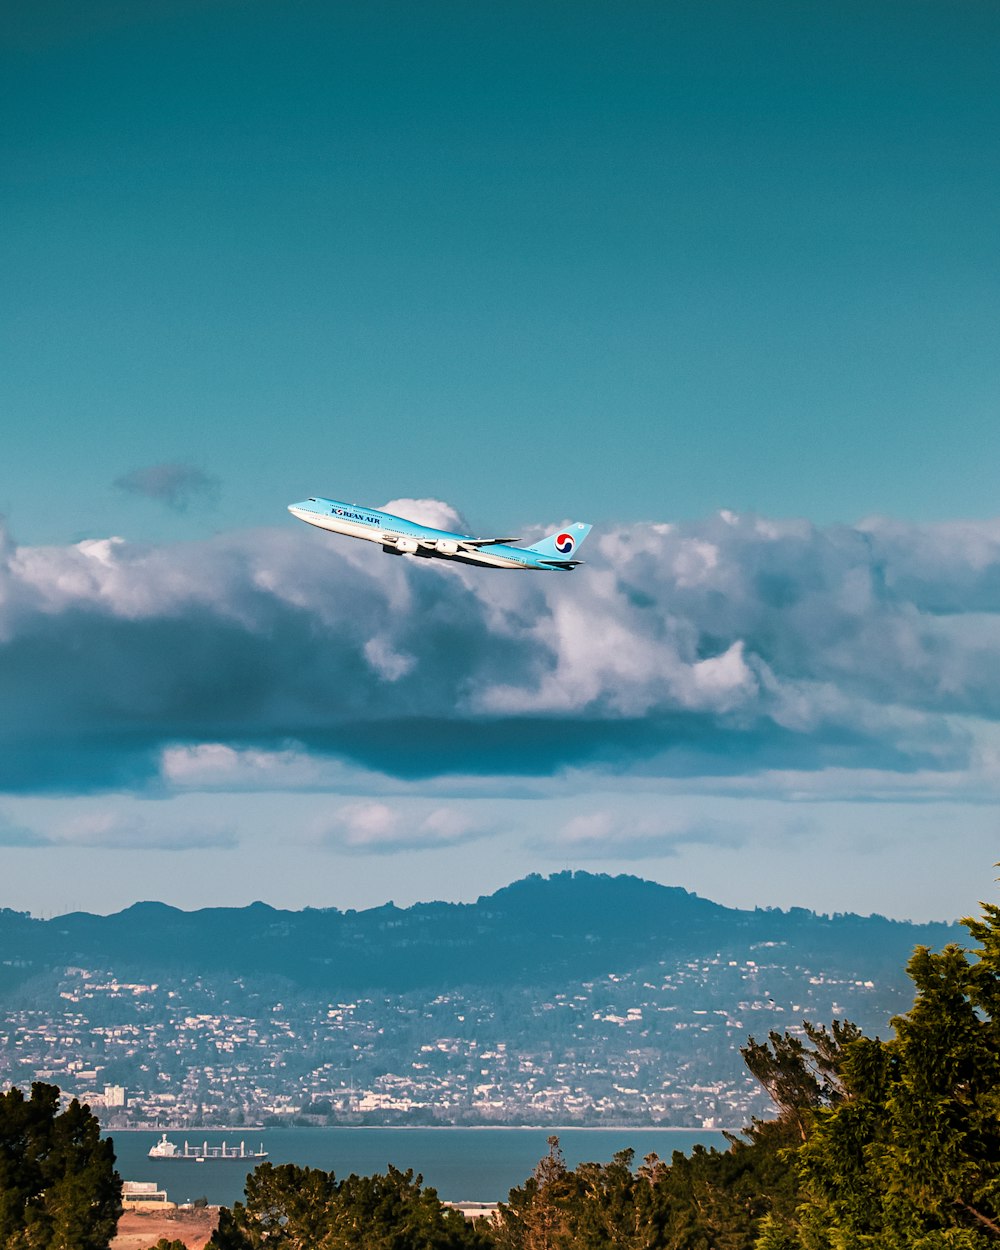 a plane flying over a city with mountains in the background